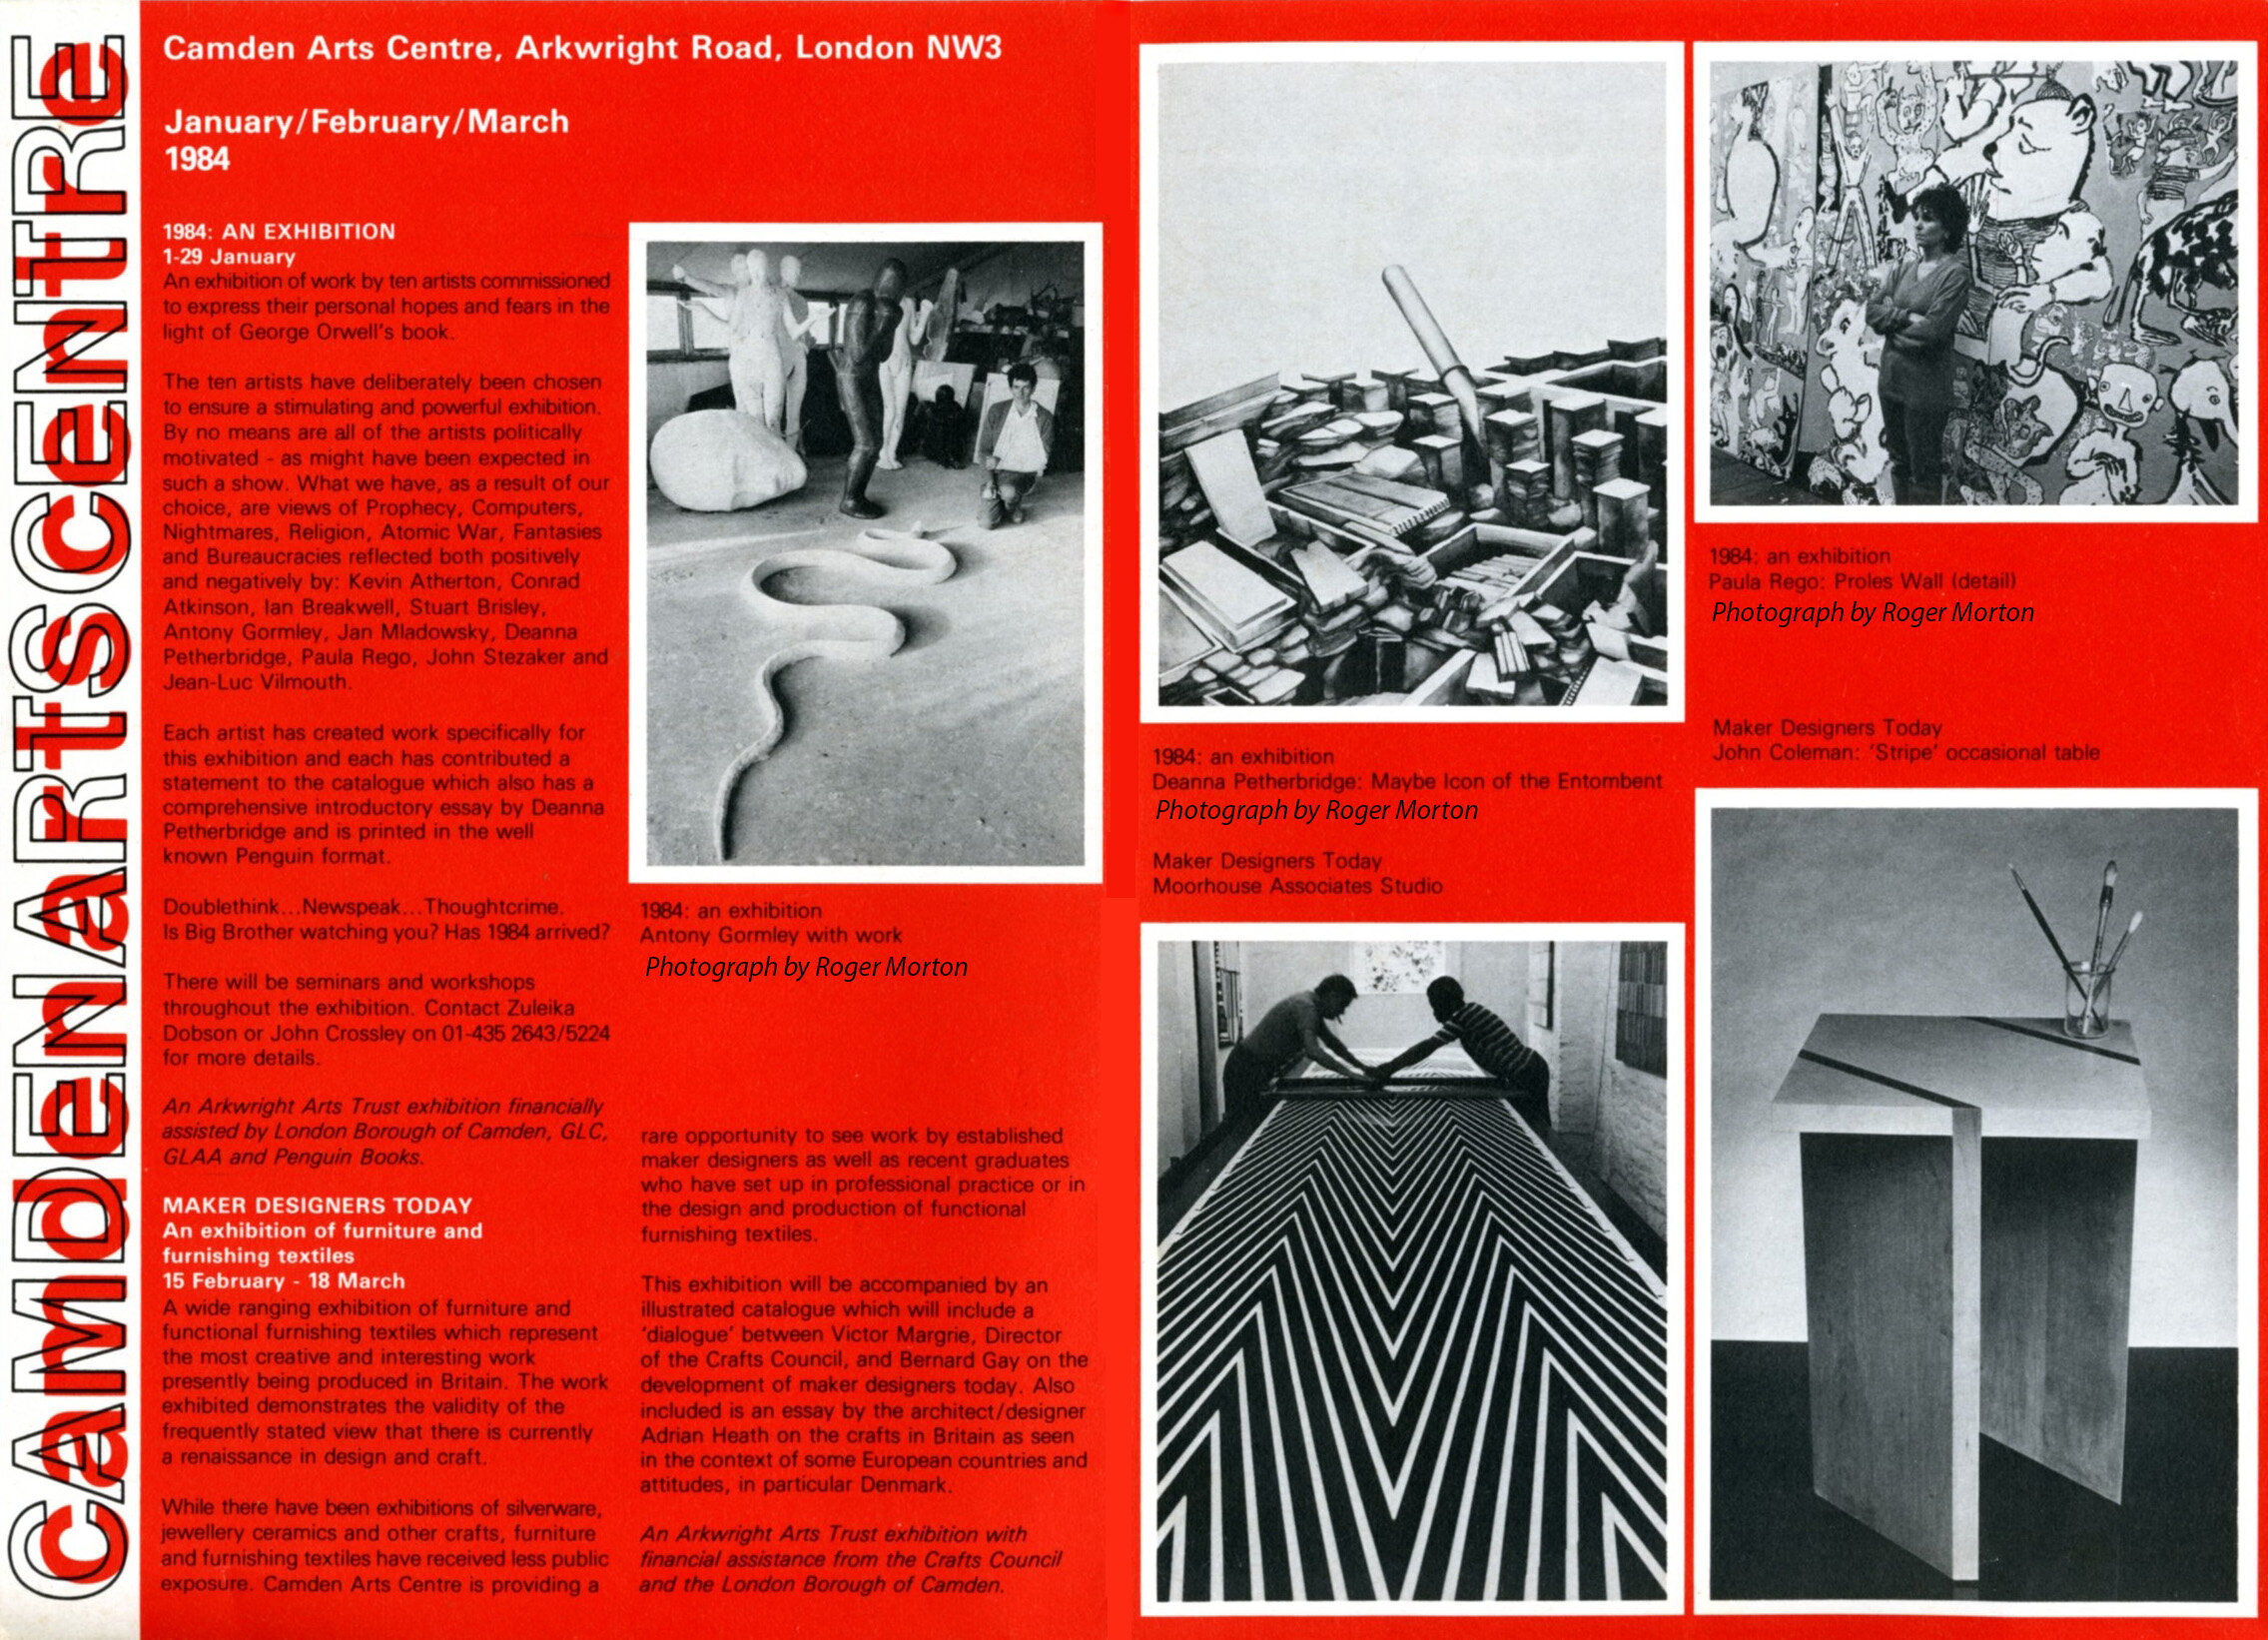 Exhibition for the Camden Arts Centre in 1984 about 1984. 